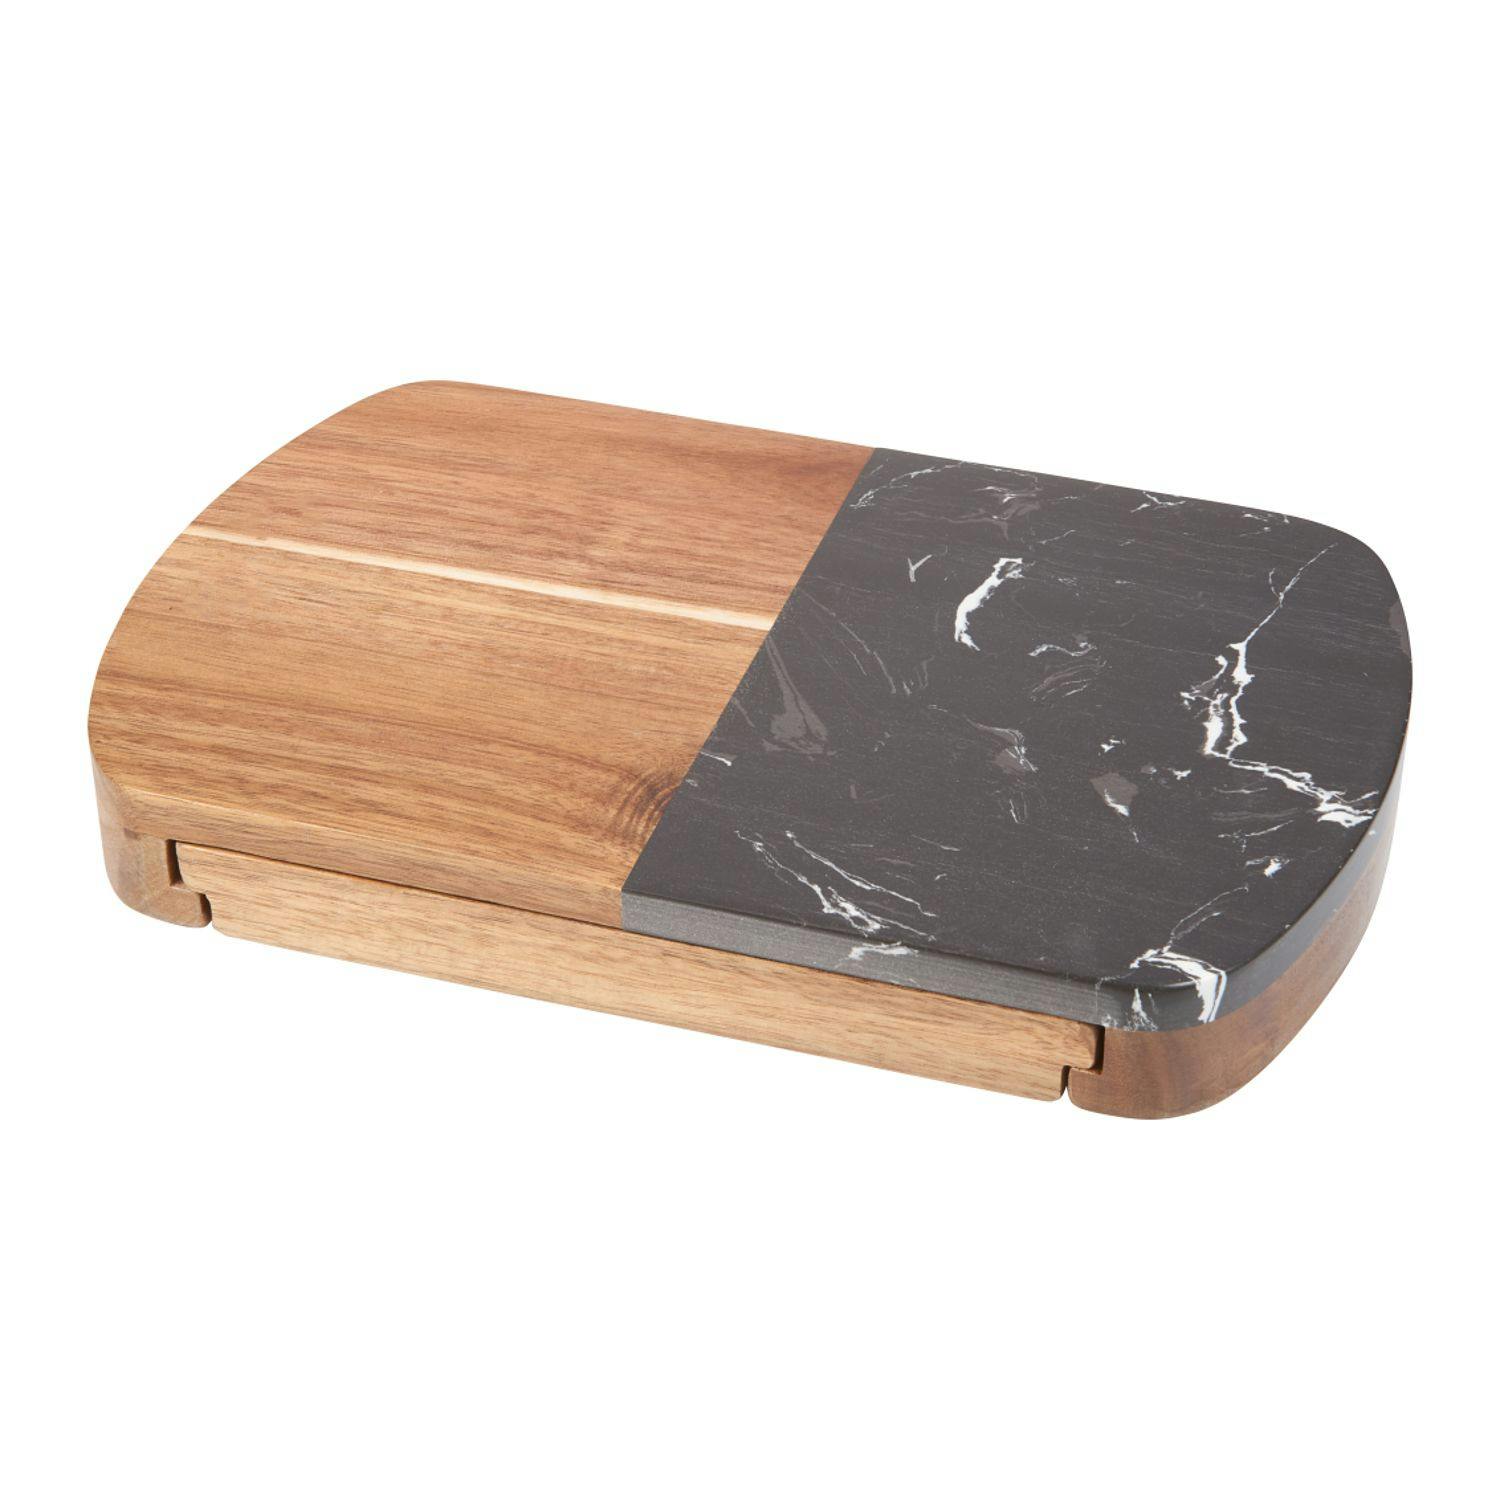 Black Marble Cheese Board Set with Knives - additional Image 1